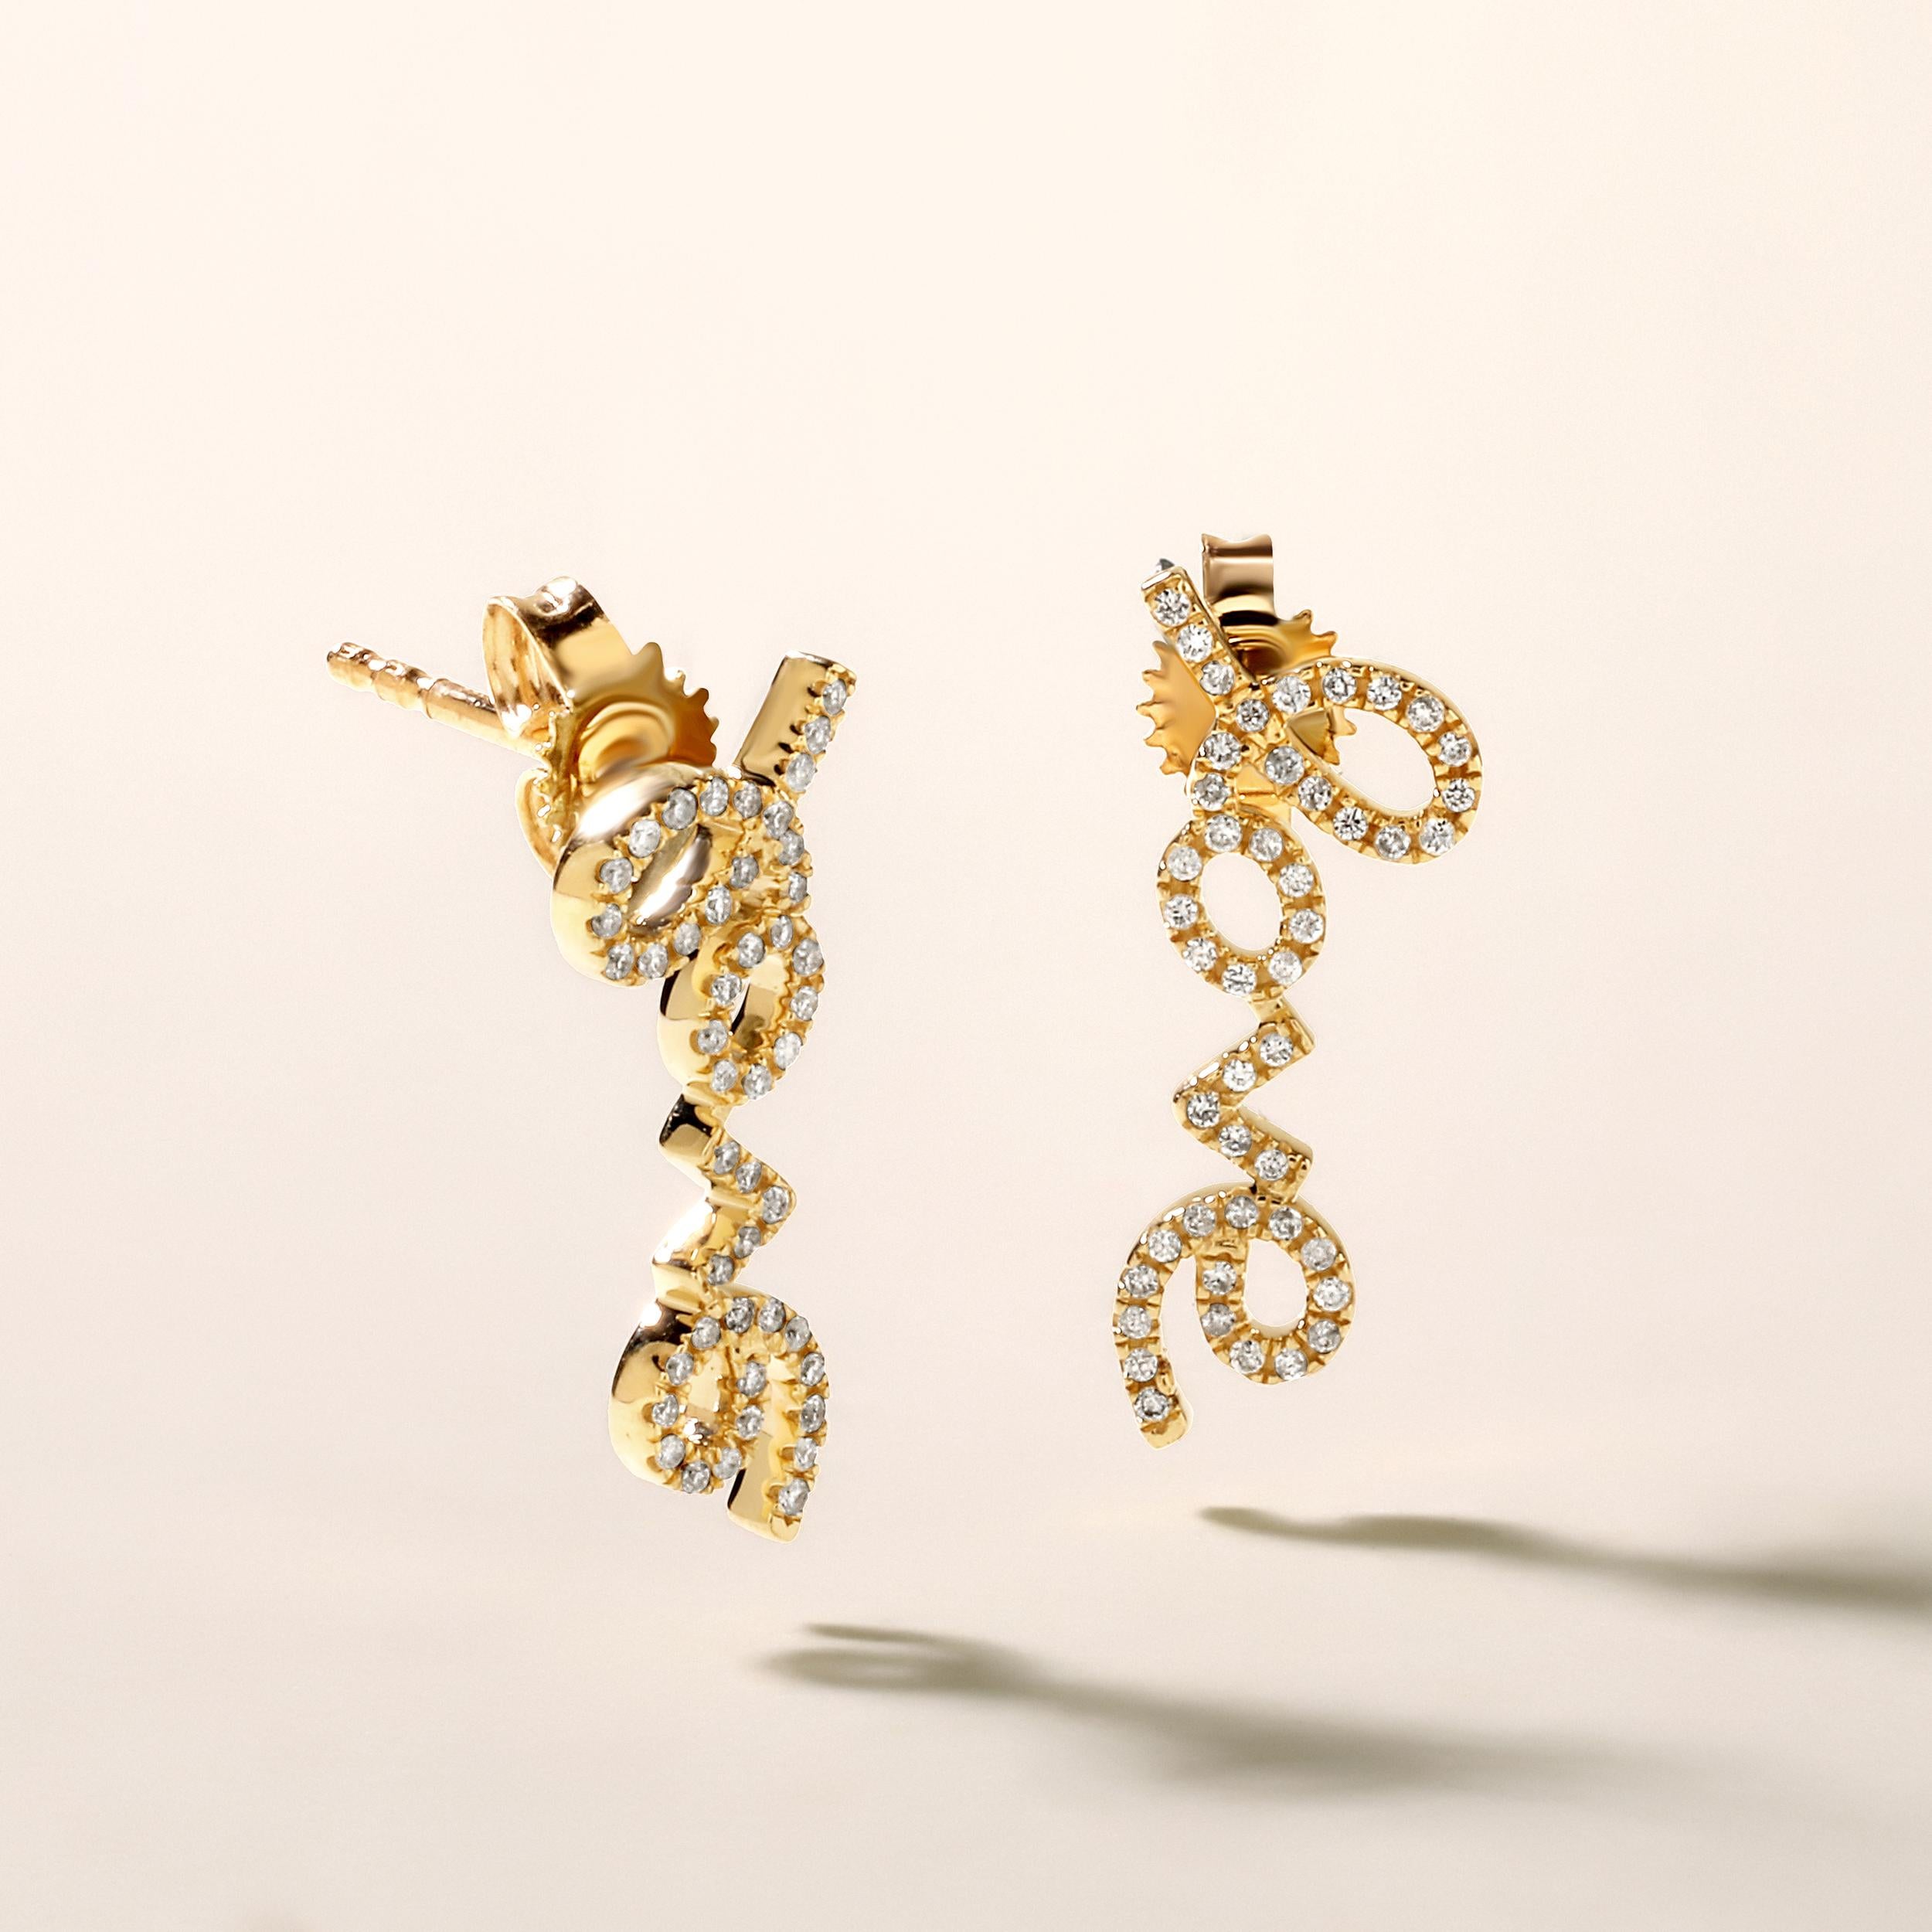 Crafted in 1.72 grams of 14K Yellow Gold, the earrings contains 92 stones of Round Diamonds with a total of 0.16 carat in F-G color and SI clarity.

CONTEMPORARY AND TIMELESS ESSENCE: Crafted in 14-karat/18-karat with 100% natural diamond and